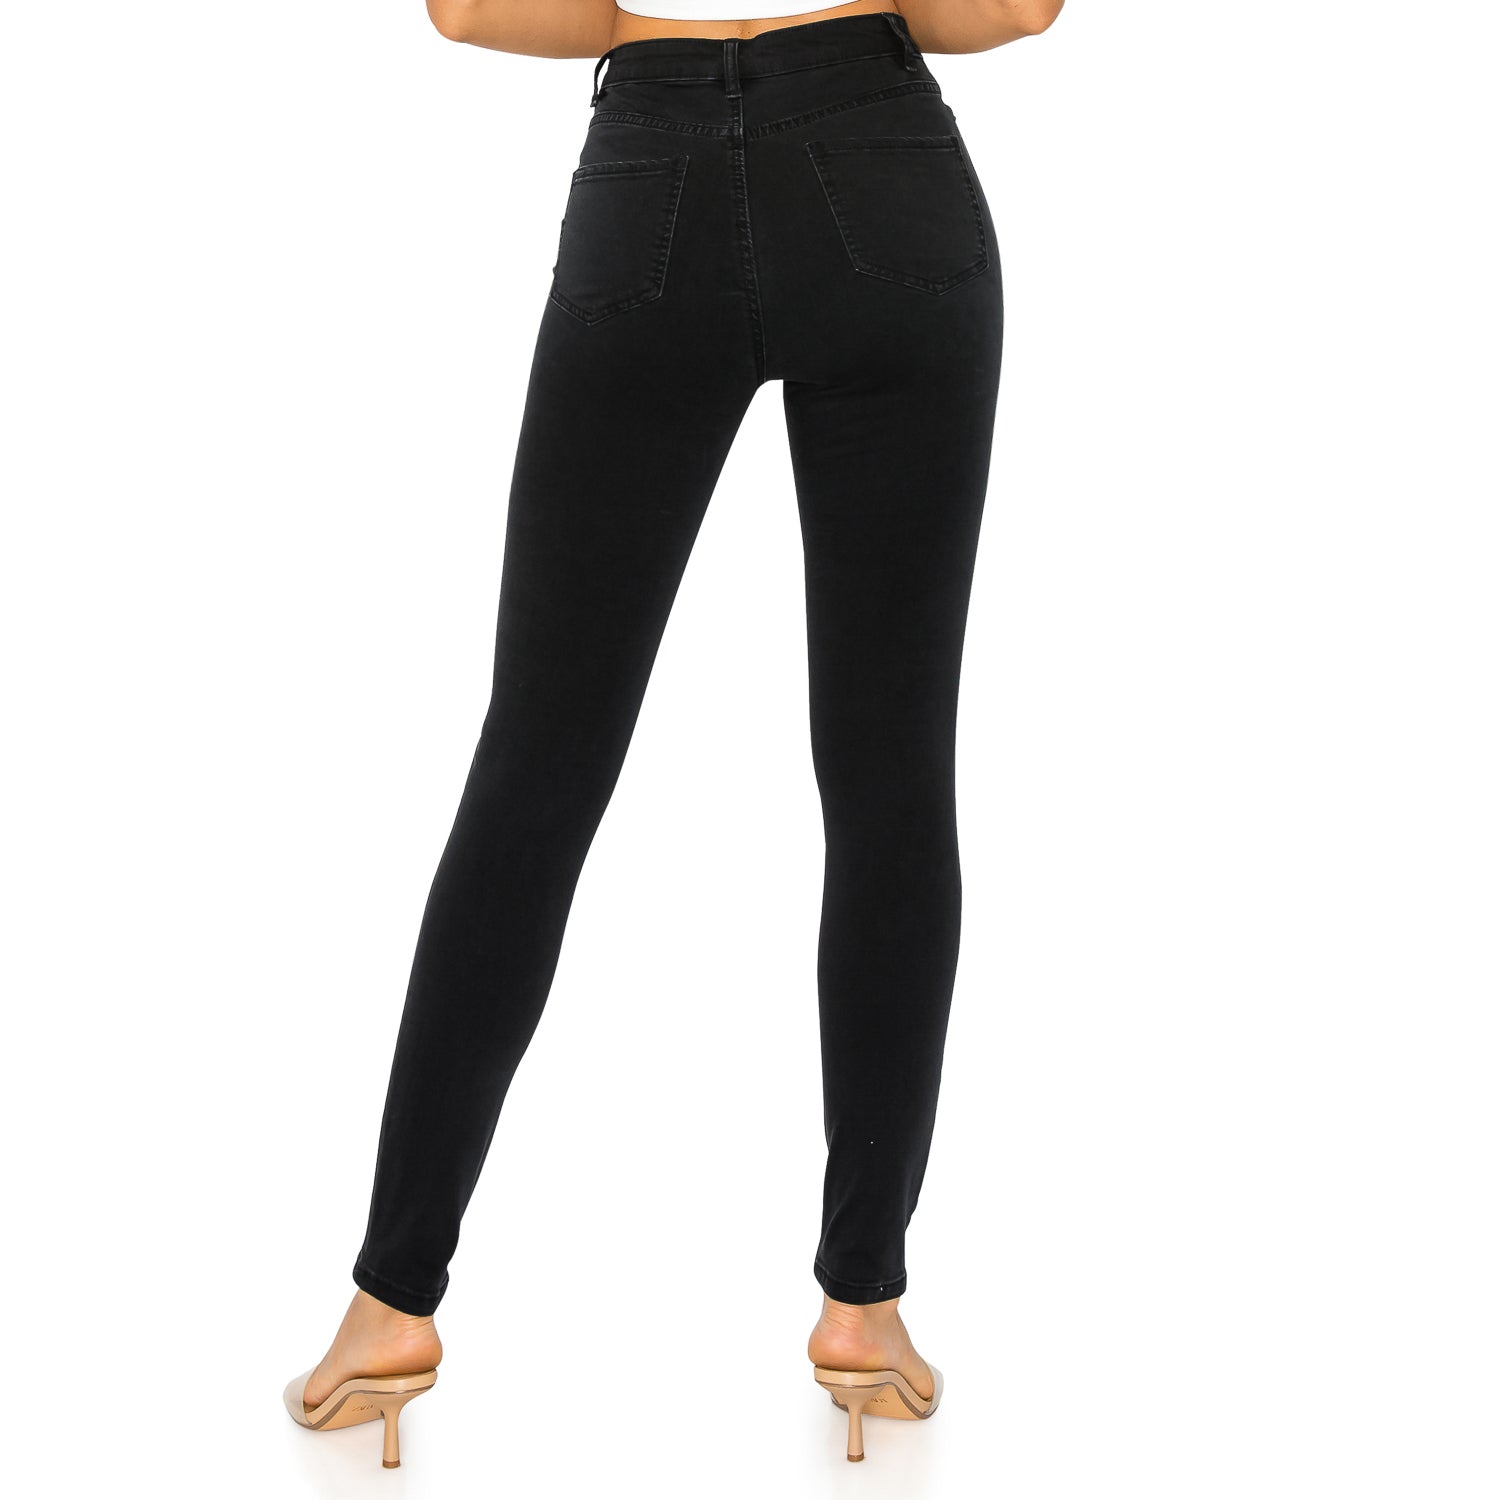 Soft Stretchy High Rise The Everyday Skinny Jeans - Black